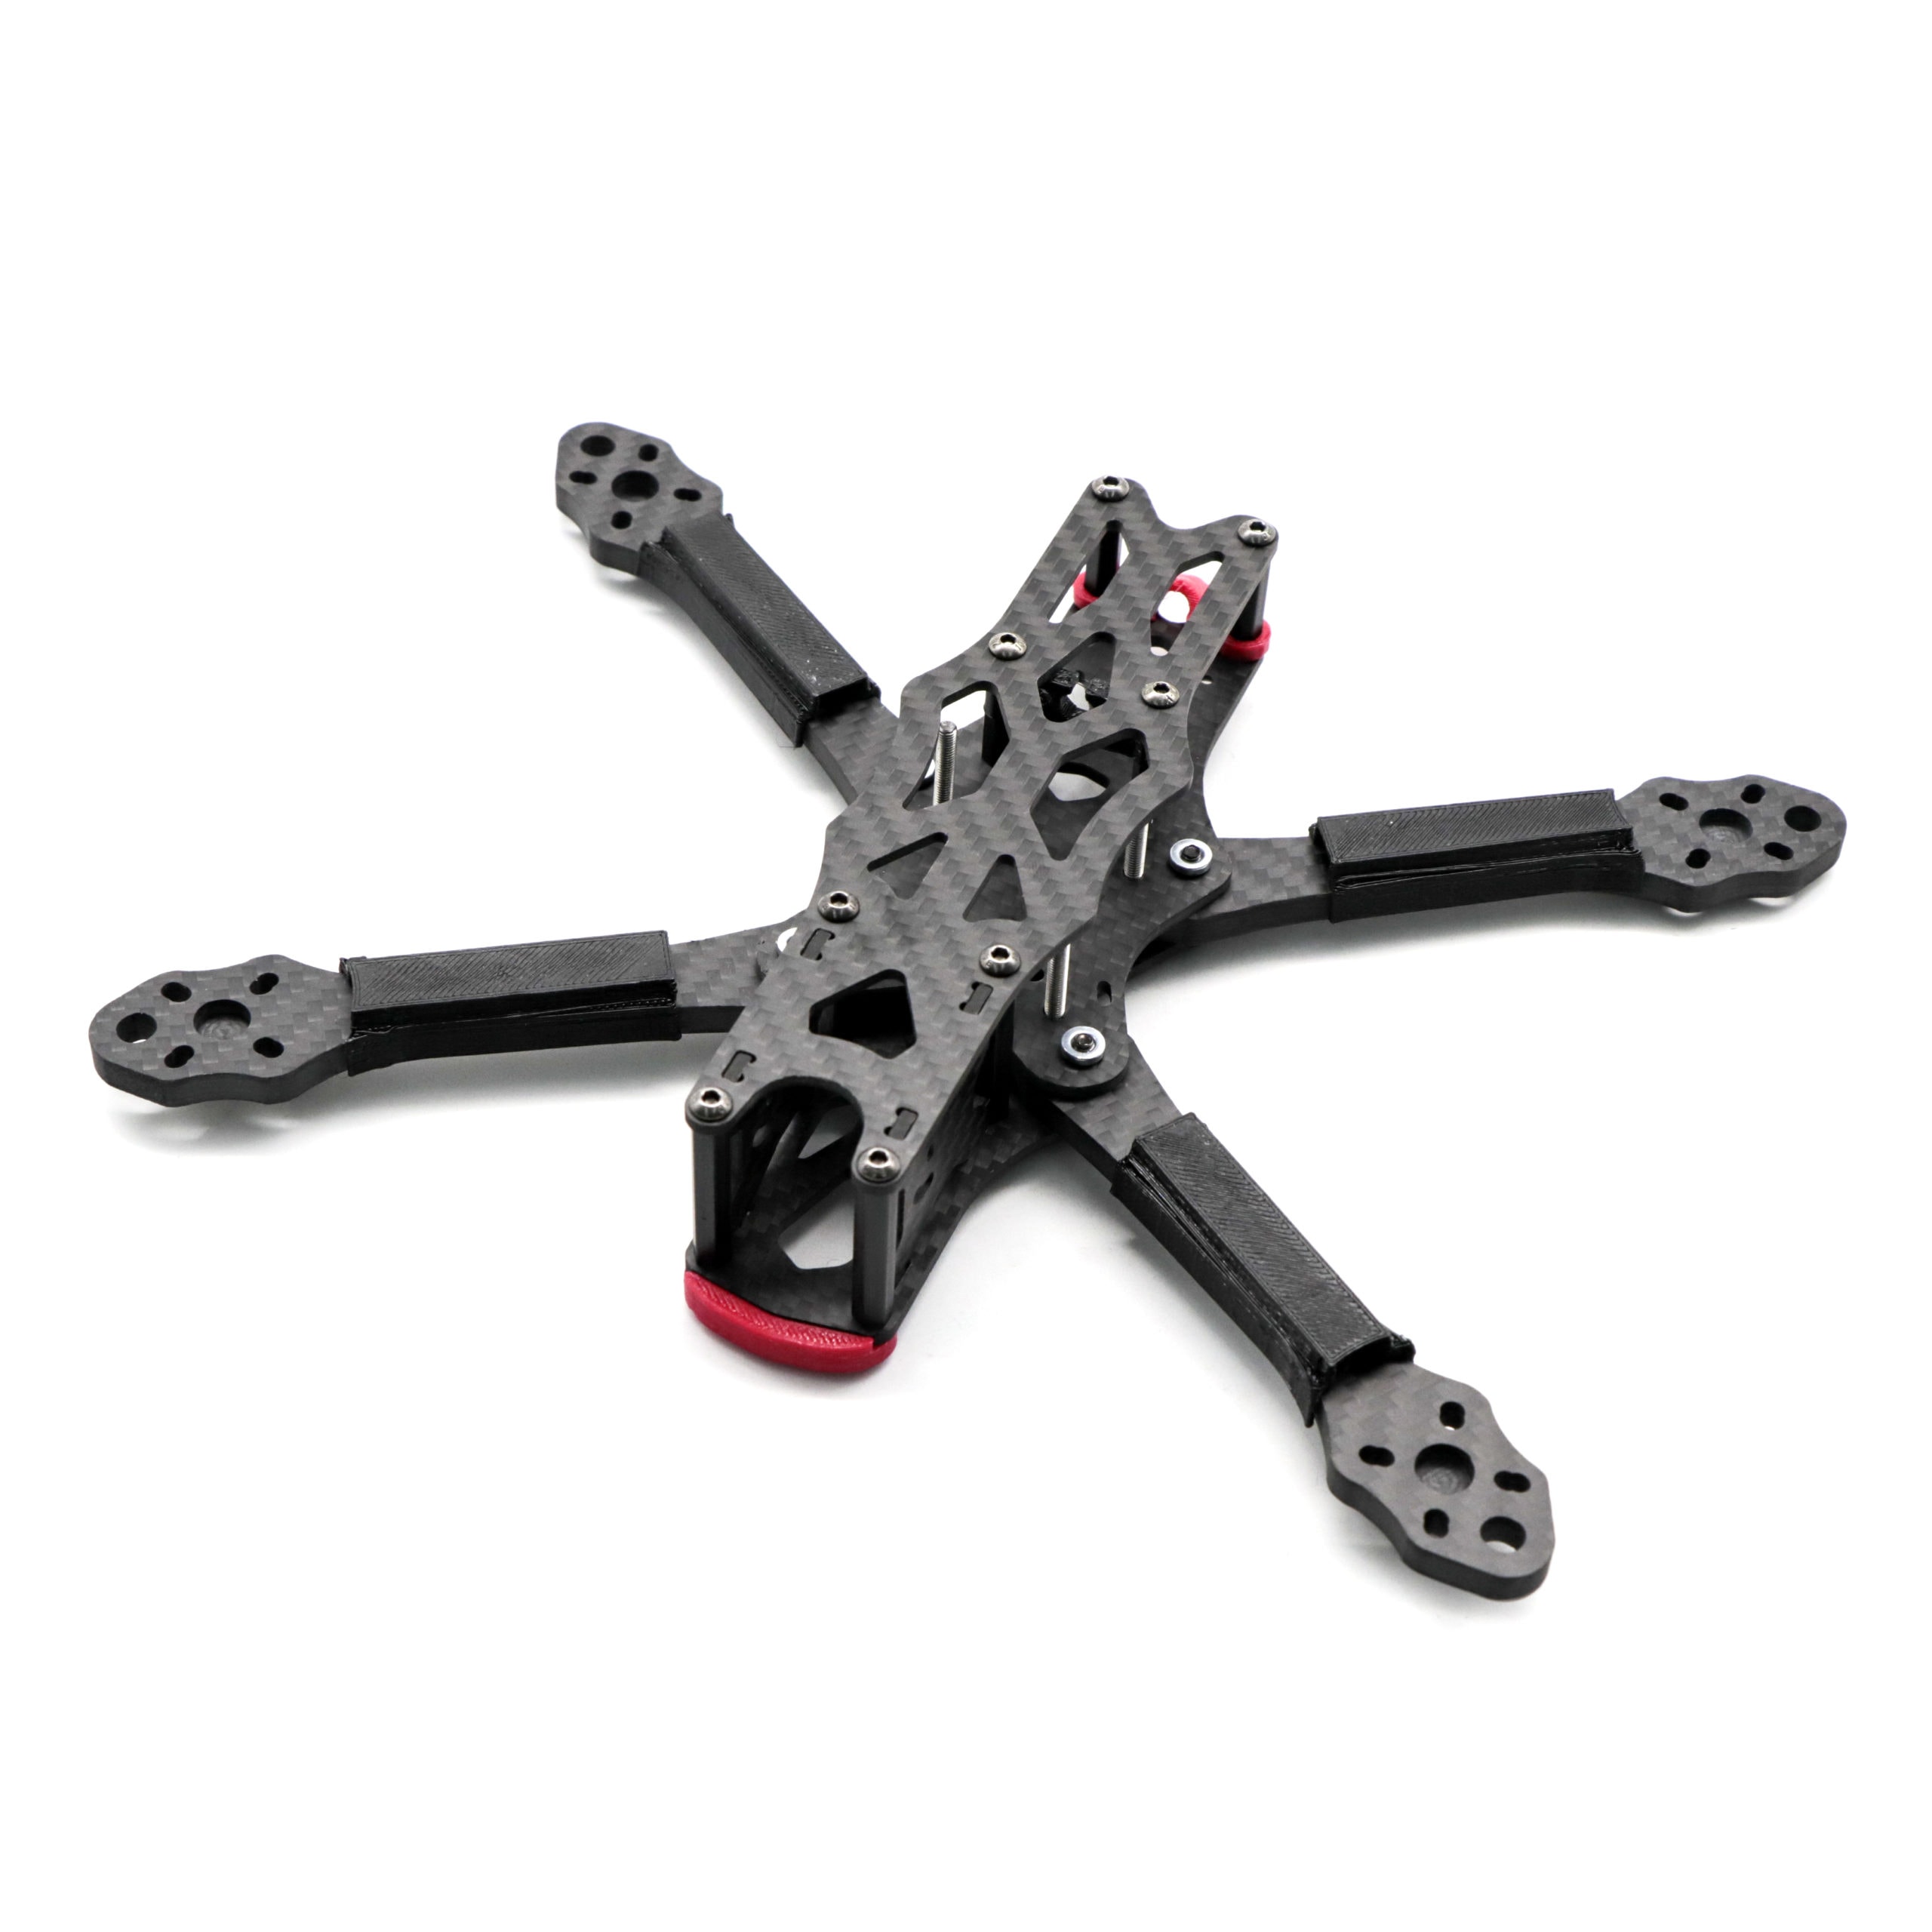 APEX 7 inch 295mm Carbon Fiber Frame Kit with 5.5mm arms